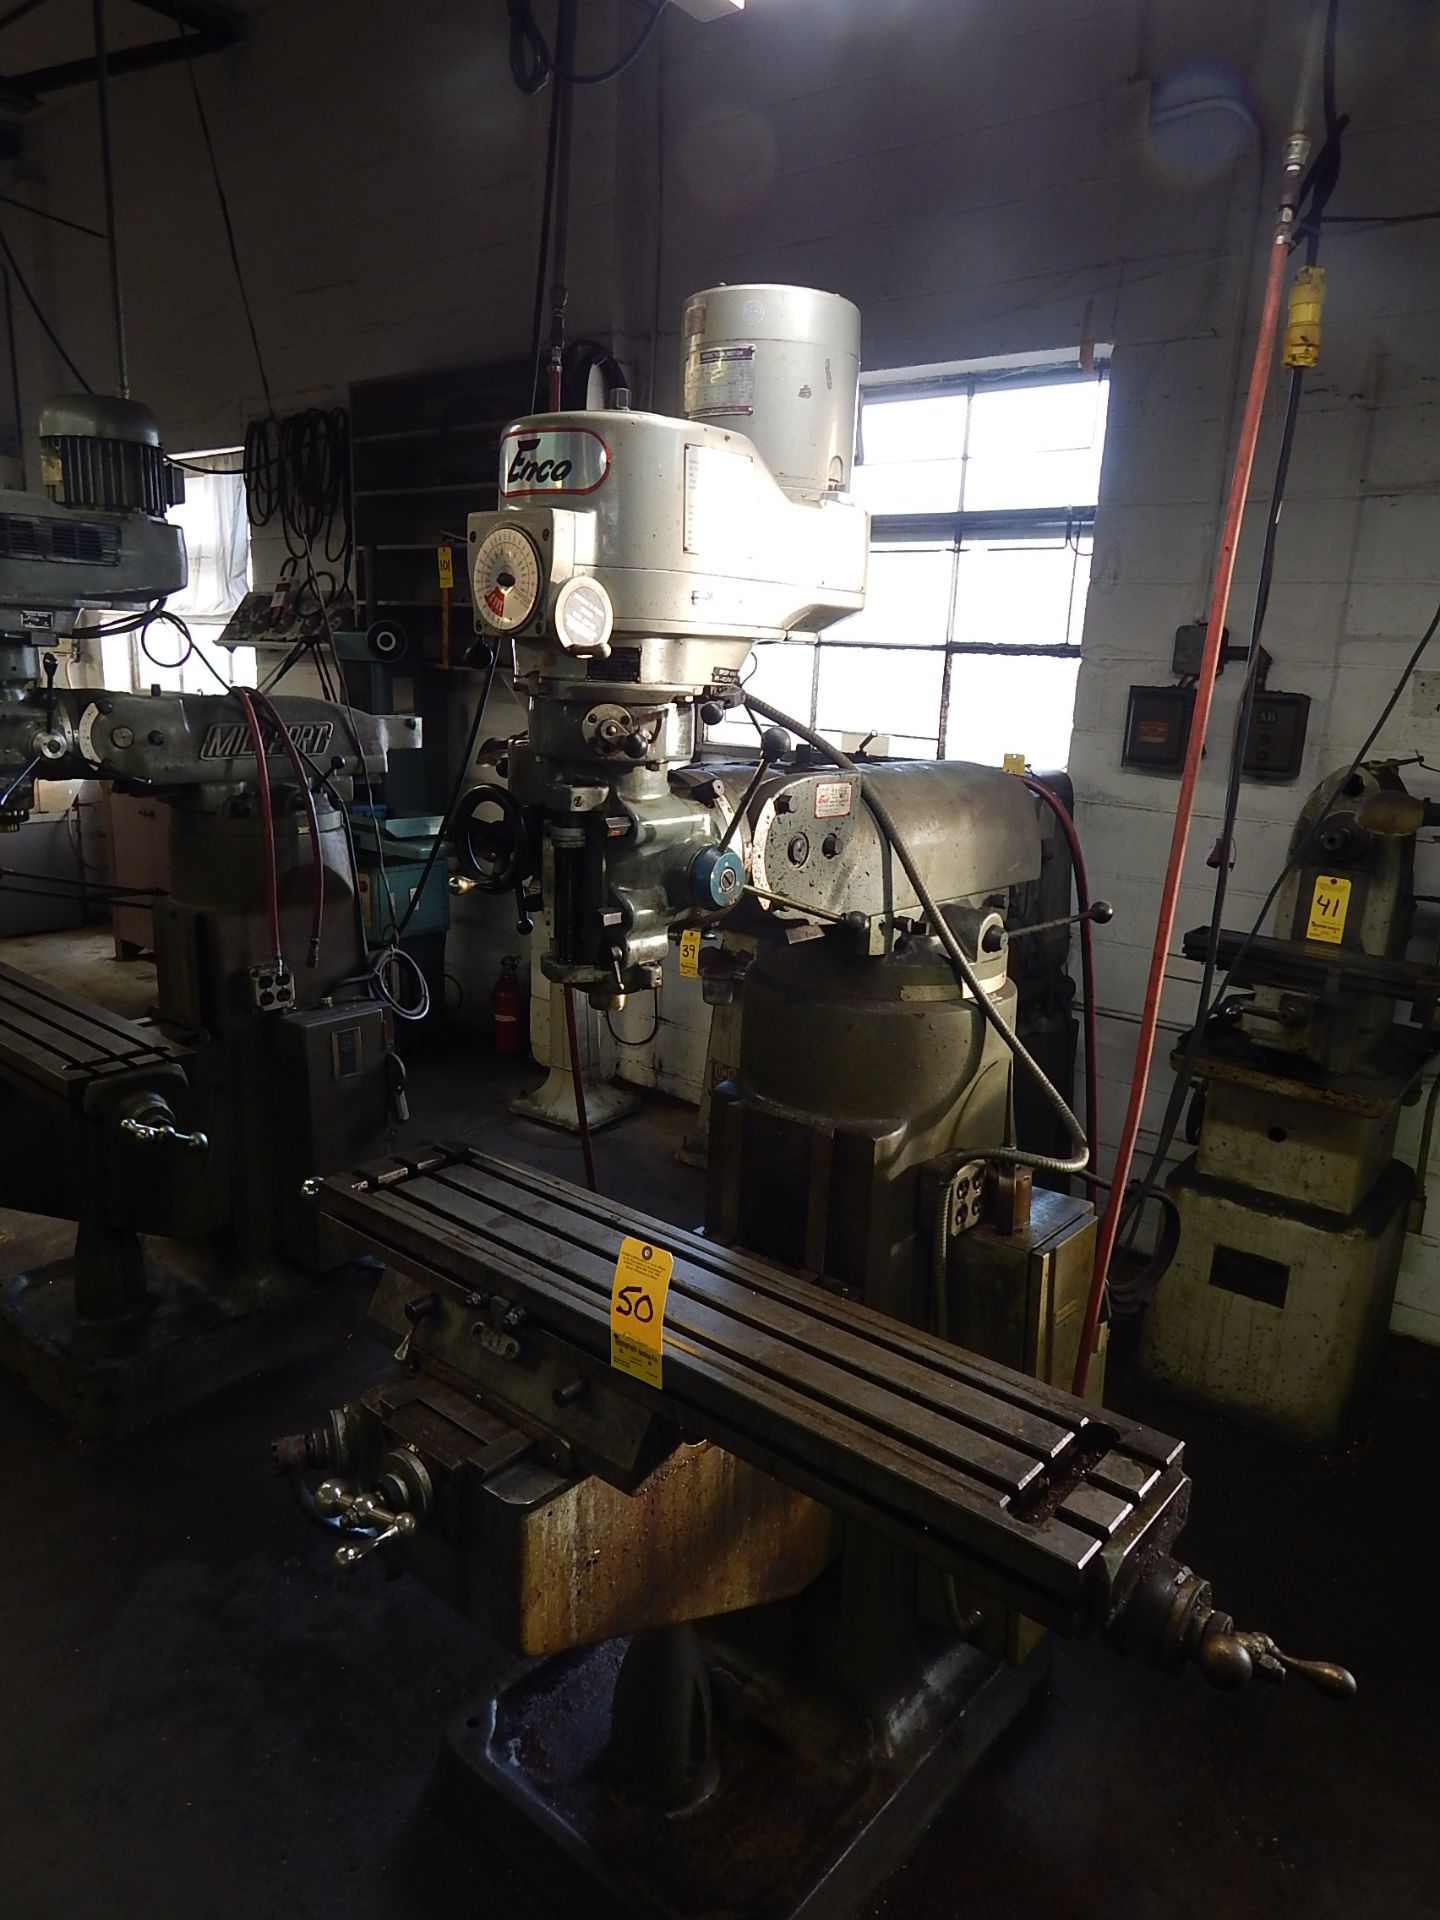 Enco 2 HP Variable Speed Vertical Mill, Model 92066, s/n 748514, 9" X 42" Table, Loading Fee $100.00 - Image 3 of 4